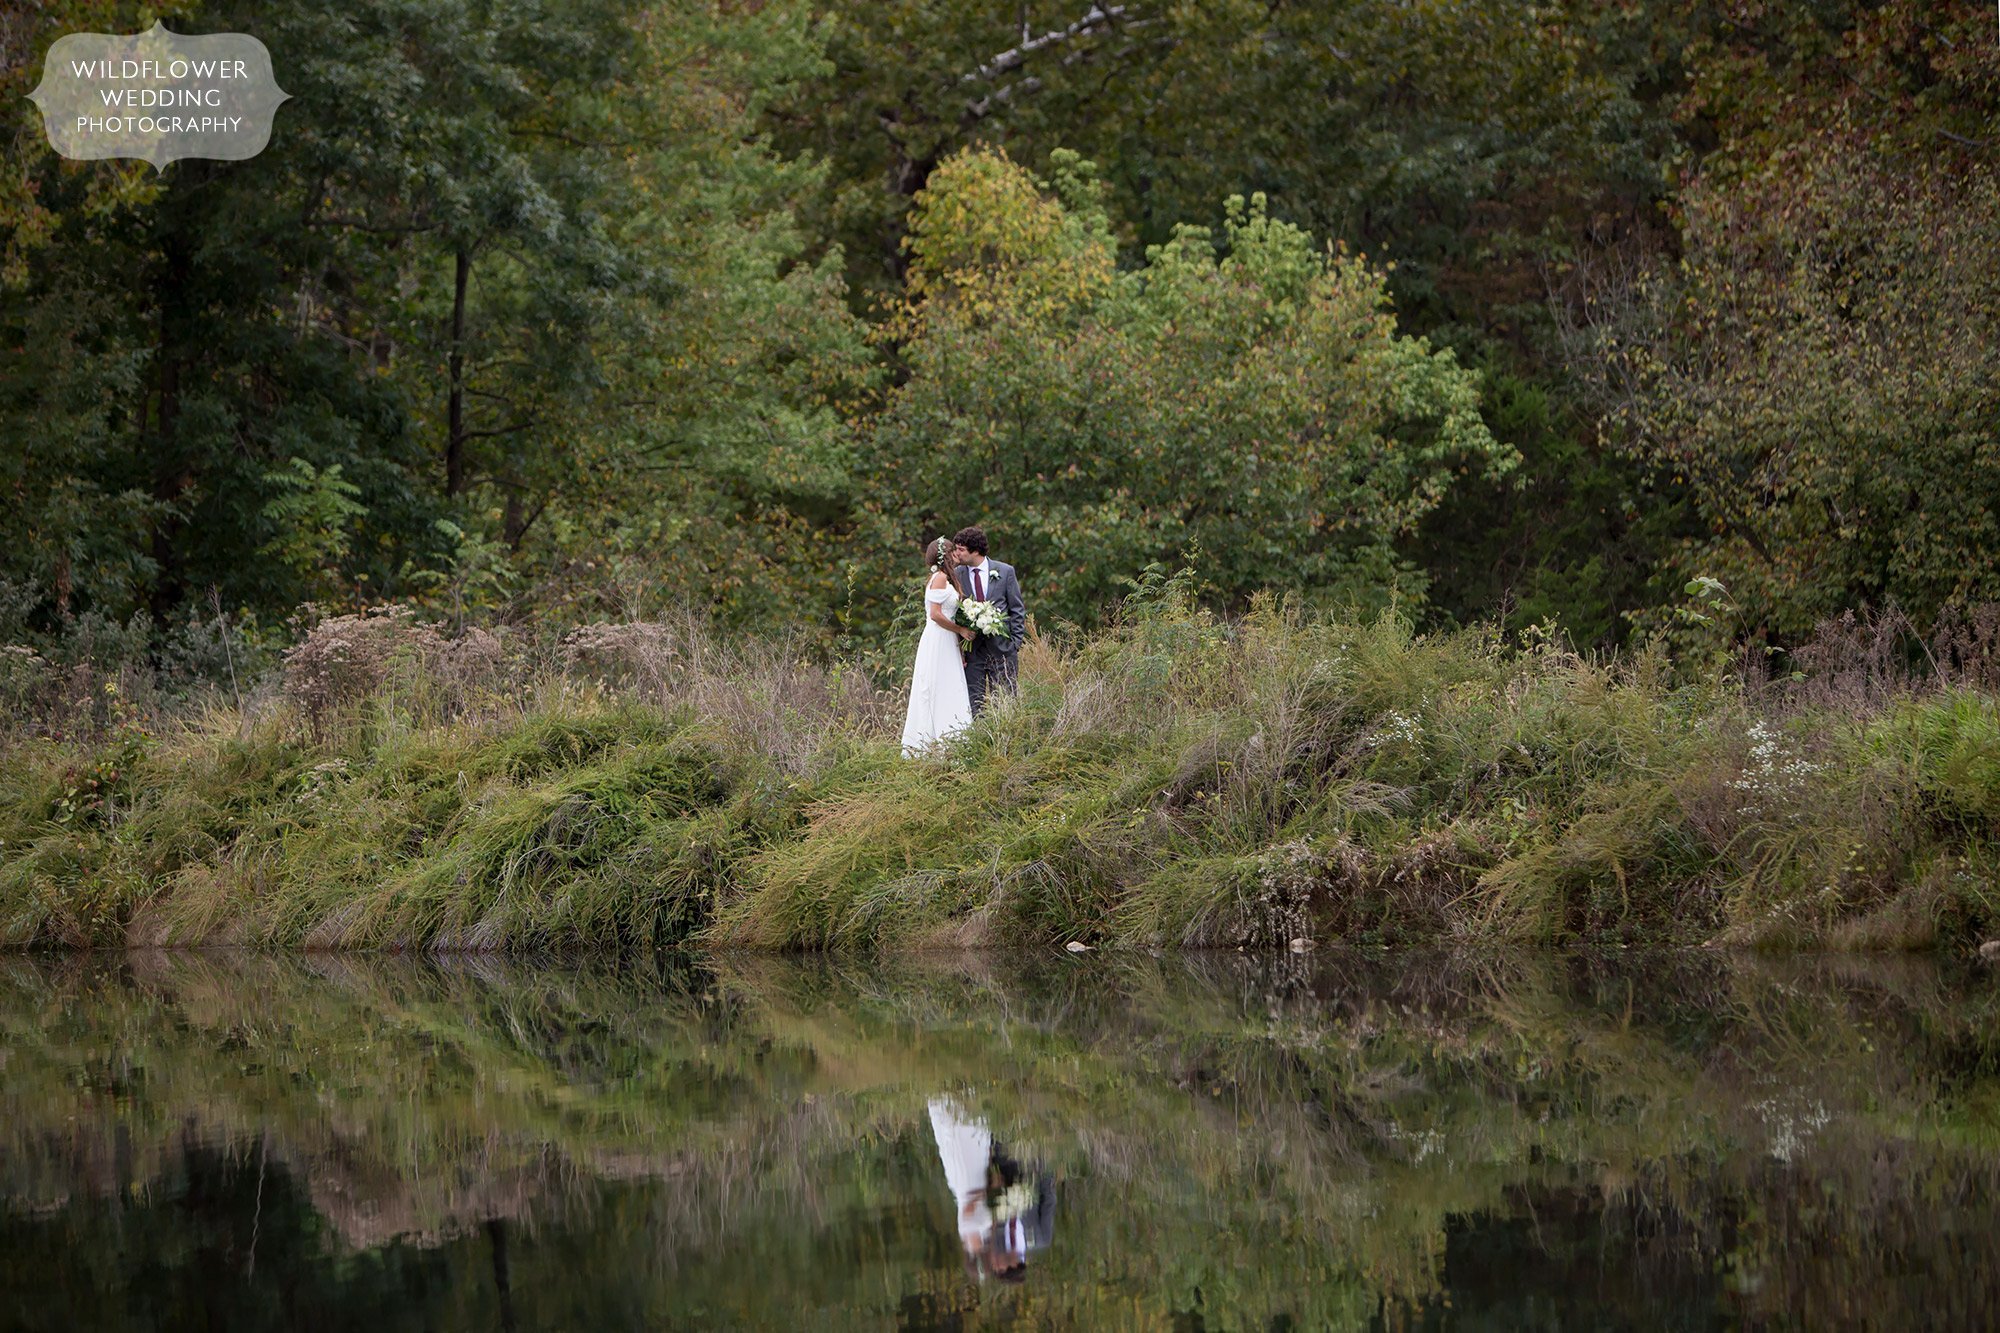 The Little Piney Lodge is a wedding venue full of nature in Hermann, MO.